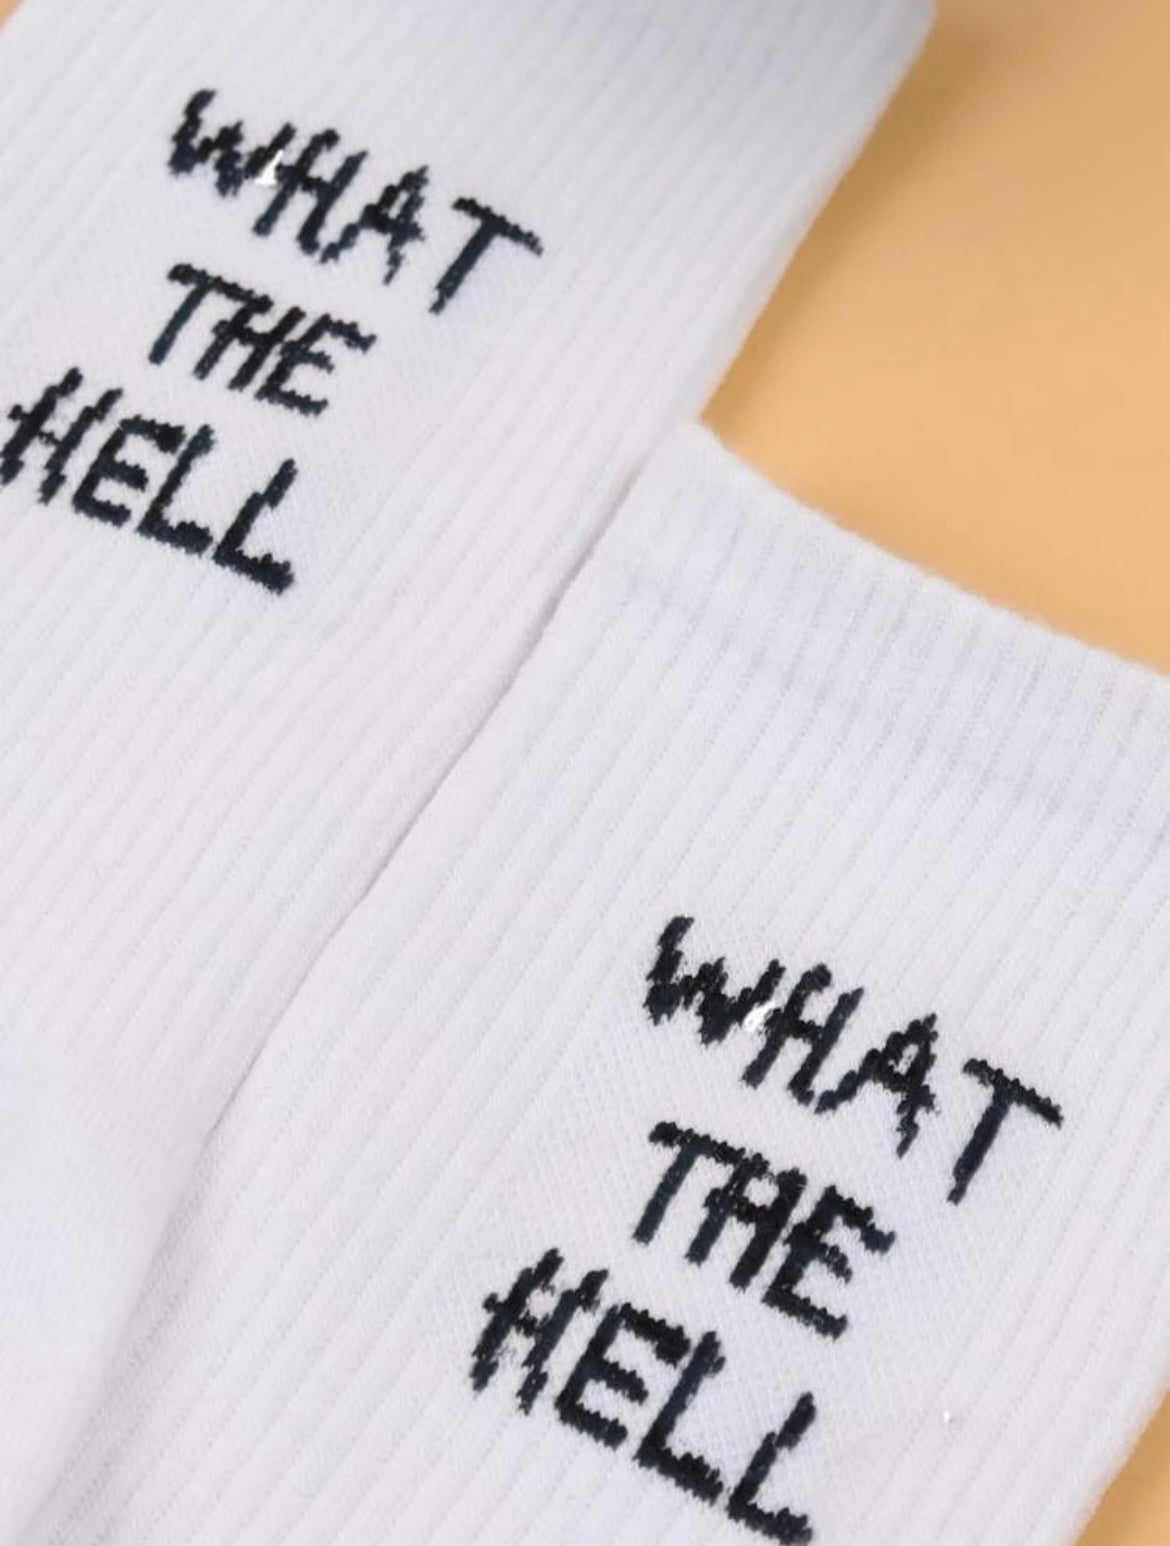 "What The Hell" Crew Socks